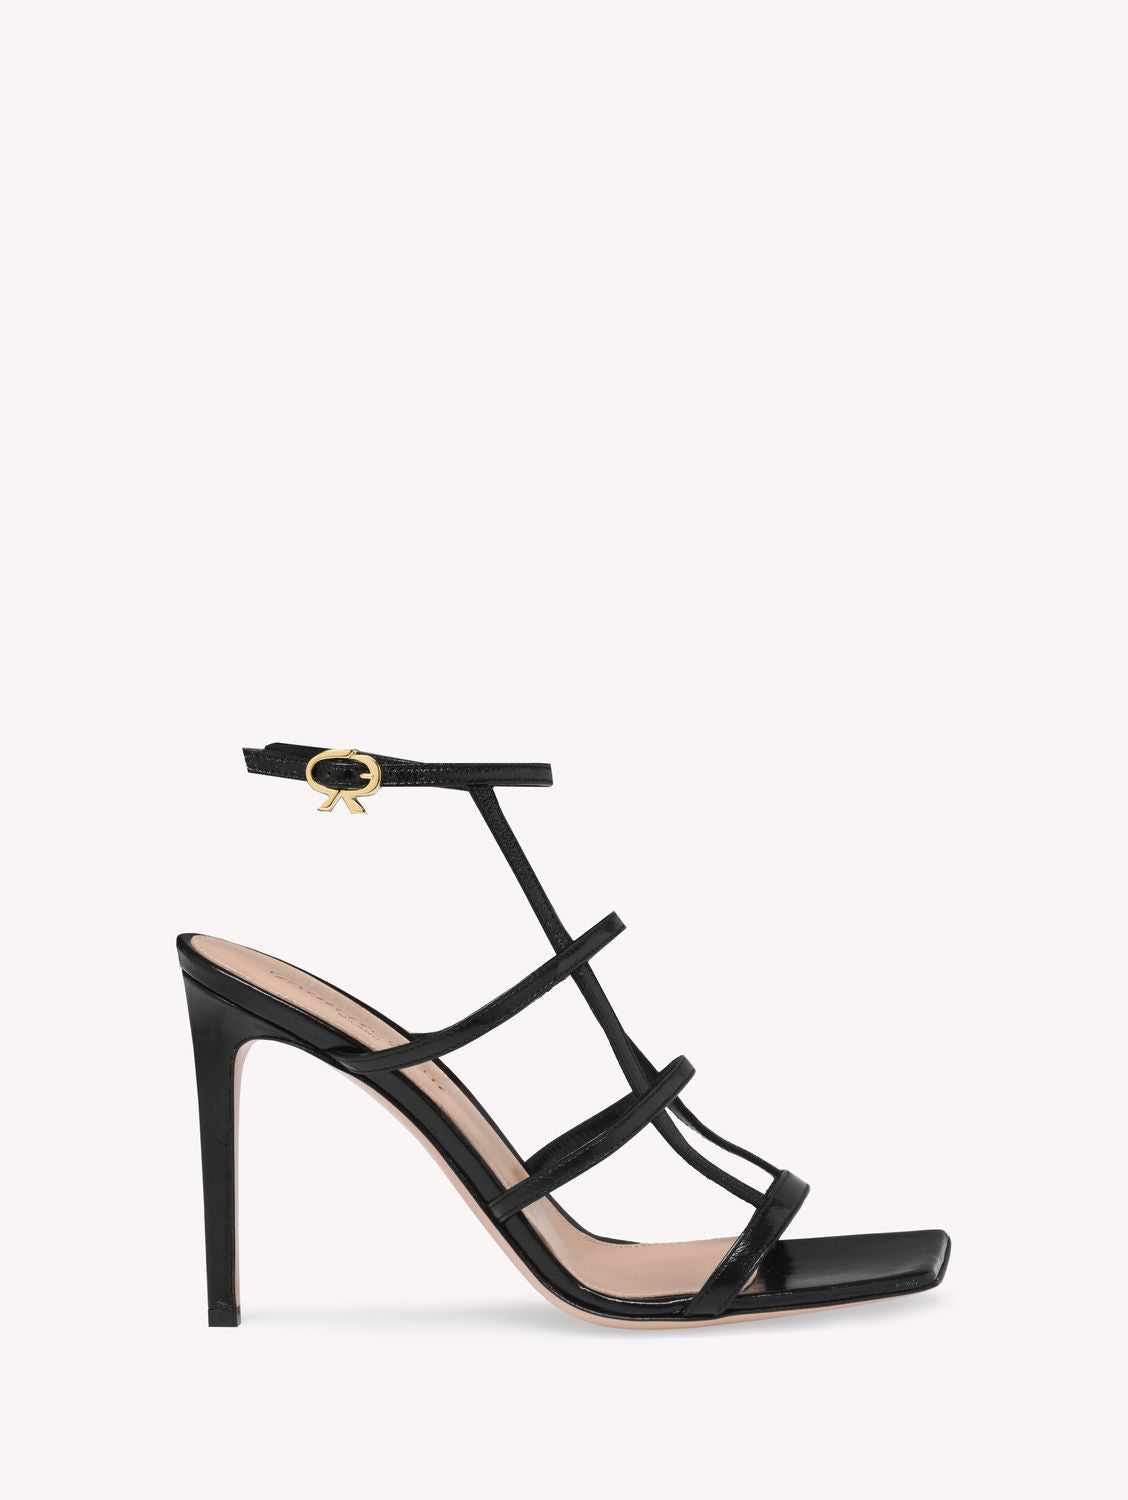 GIANVITO ROSSI Stylish Red Sandals for Women - FW24 Collection